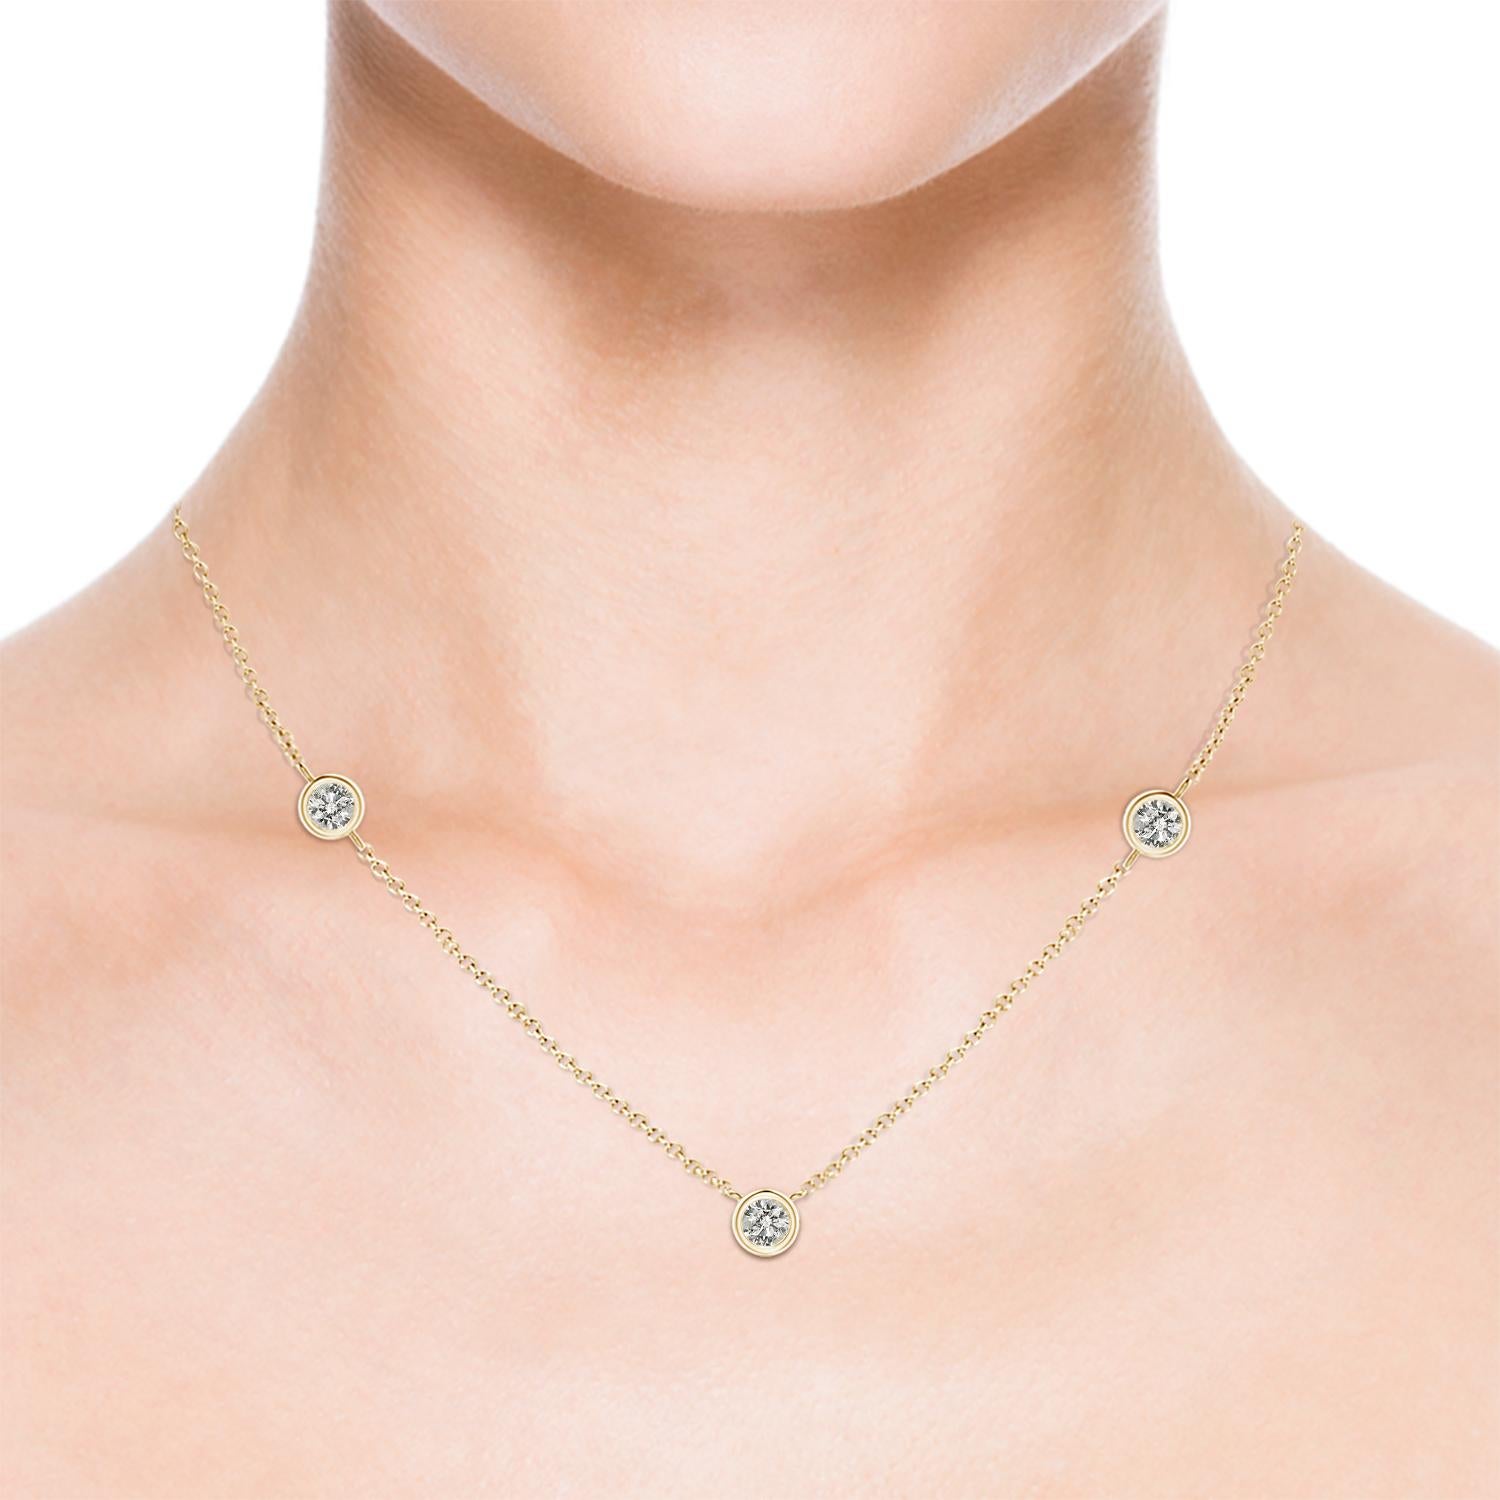 This elegant and stylish necklace by the yard is adorned with round station diamonds in bezel settings. It is crafted in 14k yellow gold and is sure to stand out.
Diamond is the Birthstone for April and traditional gift for 10th wedding